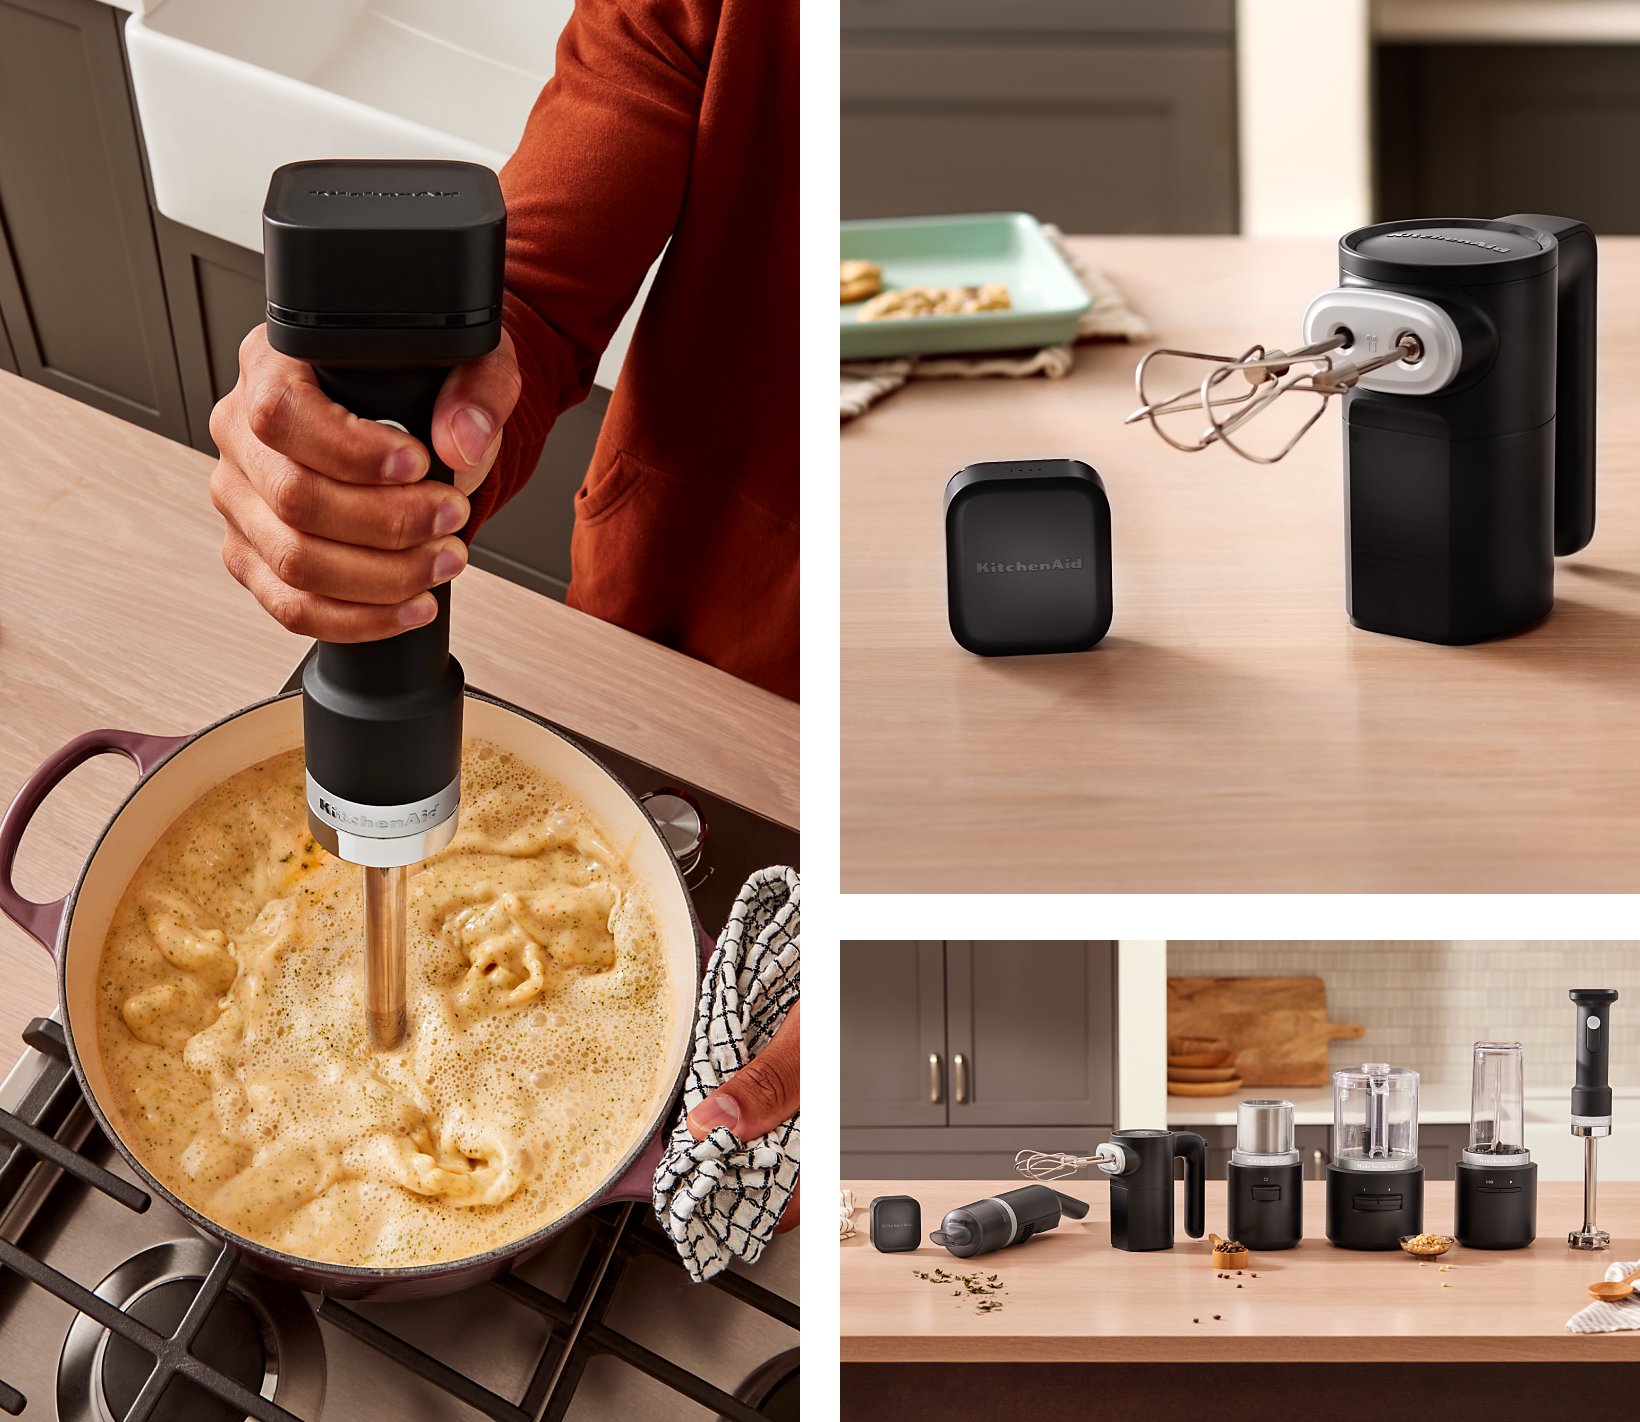 A collage of images including a person using the KitchenAid Go™ Cordless Hand Blender to blend soup; the KitchenAid Go™ Cordless Hand Mixer resting on a countertop next to the rechargeable battery; KitchenAid Go™ Cordless appliances lined up on a countertop.